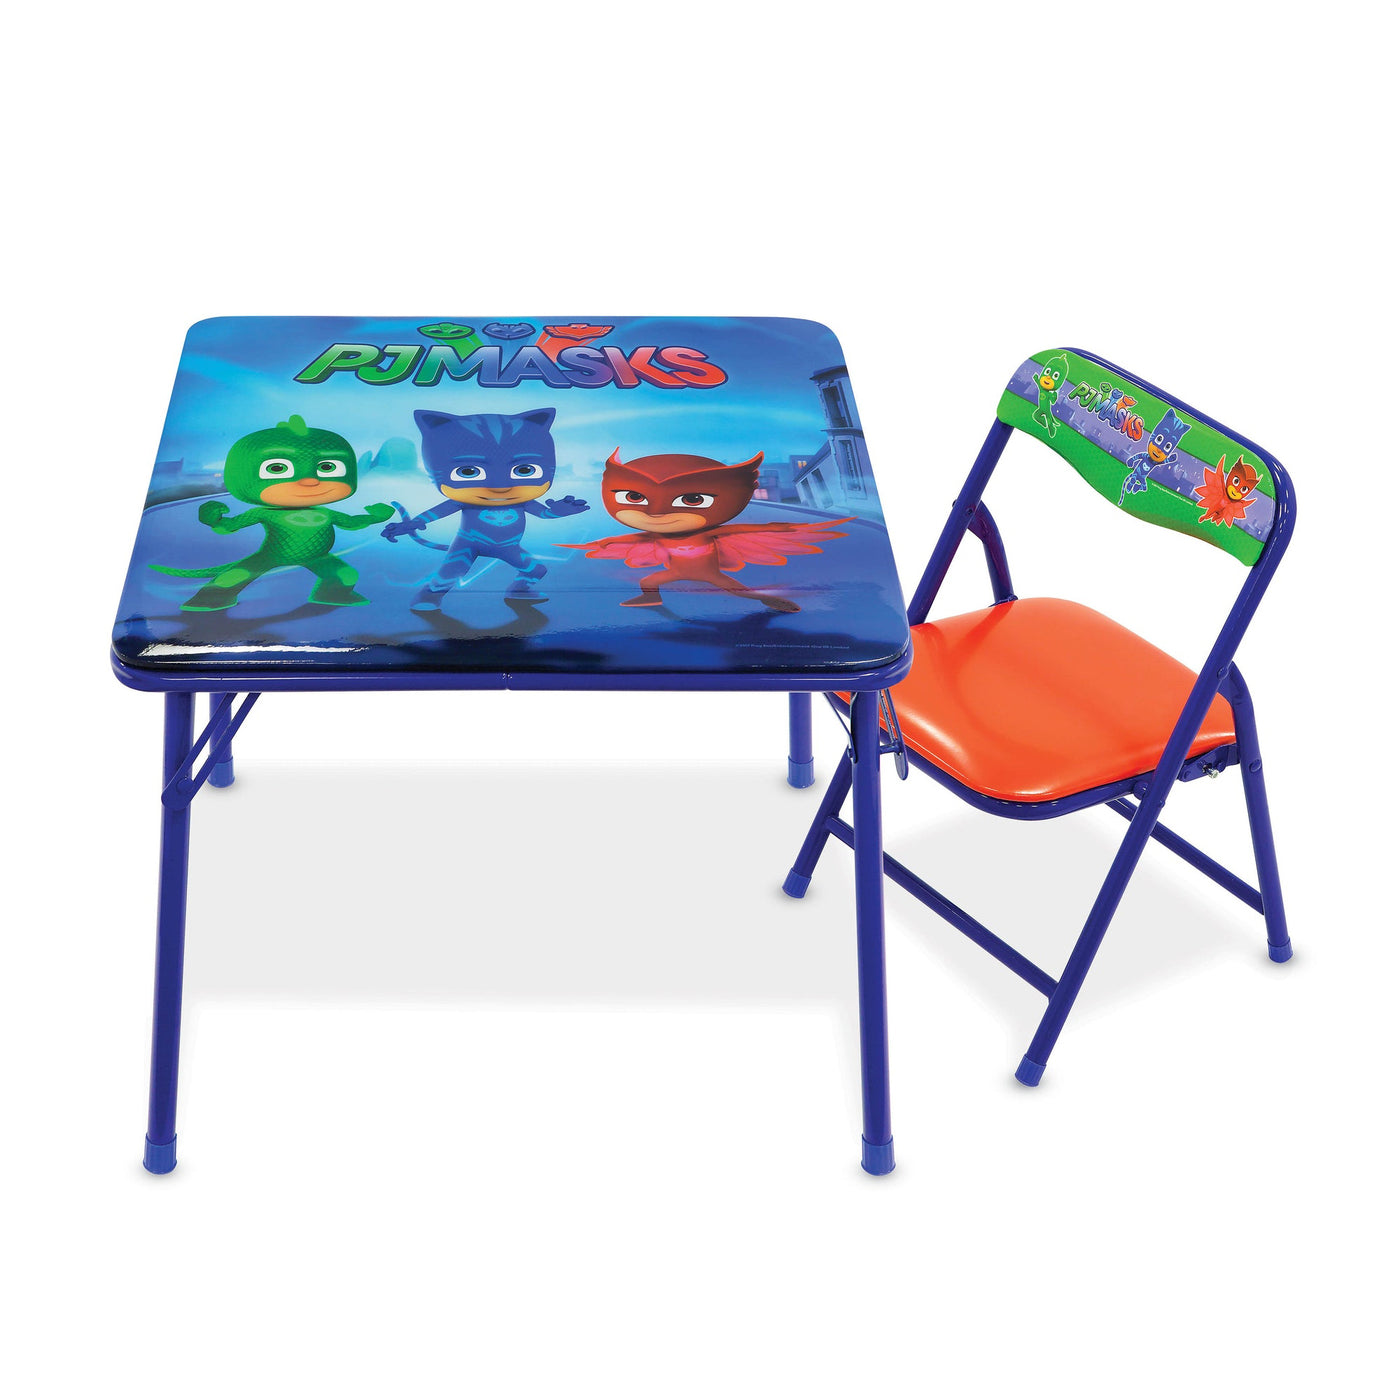 PJ Masks Junior Table and Chair Set